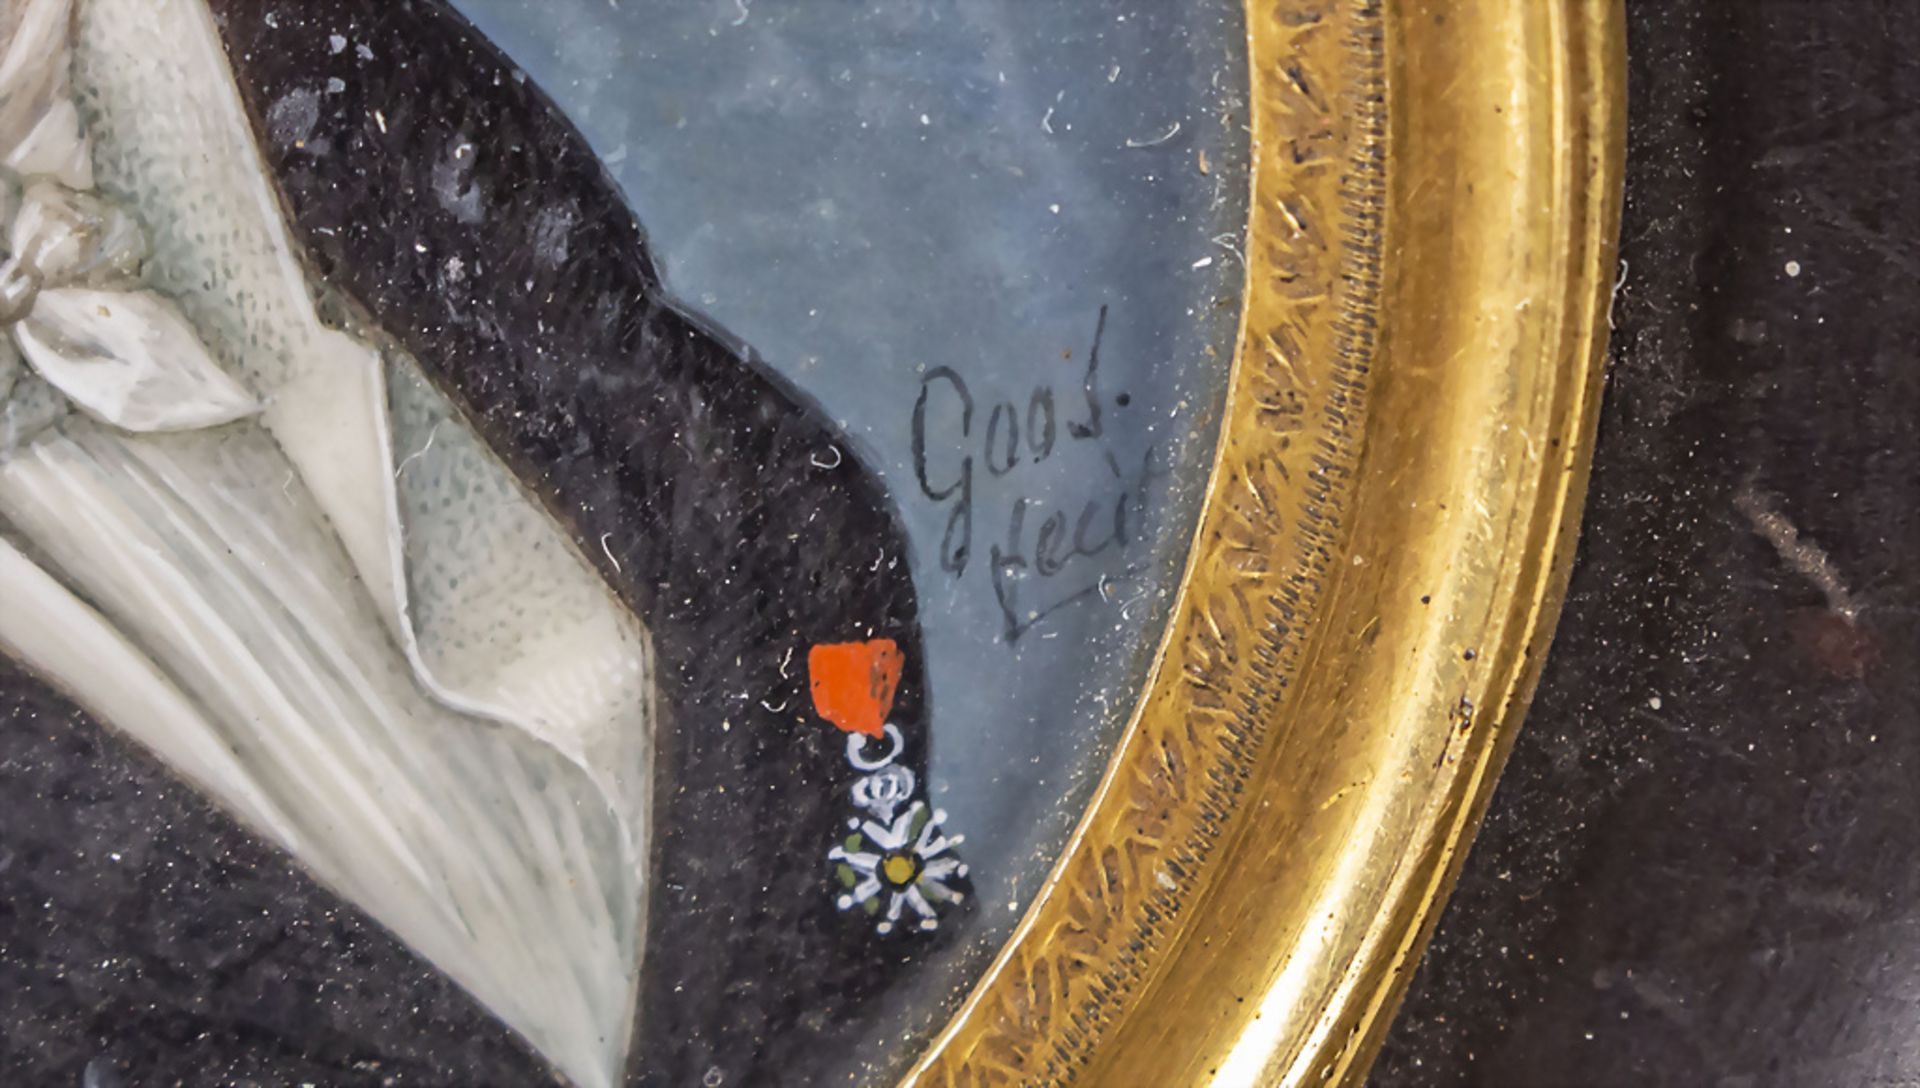 Empire Miniatur 'Herr mit Orden' / An Empire miniature portrait of a gentleman with a medal, ... - Image 3 of 4